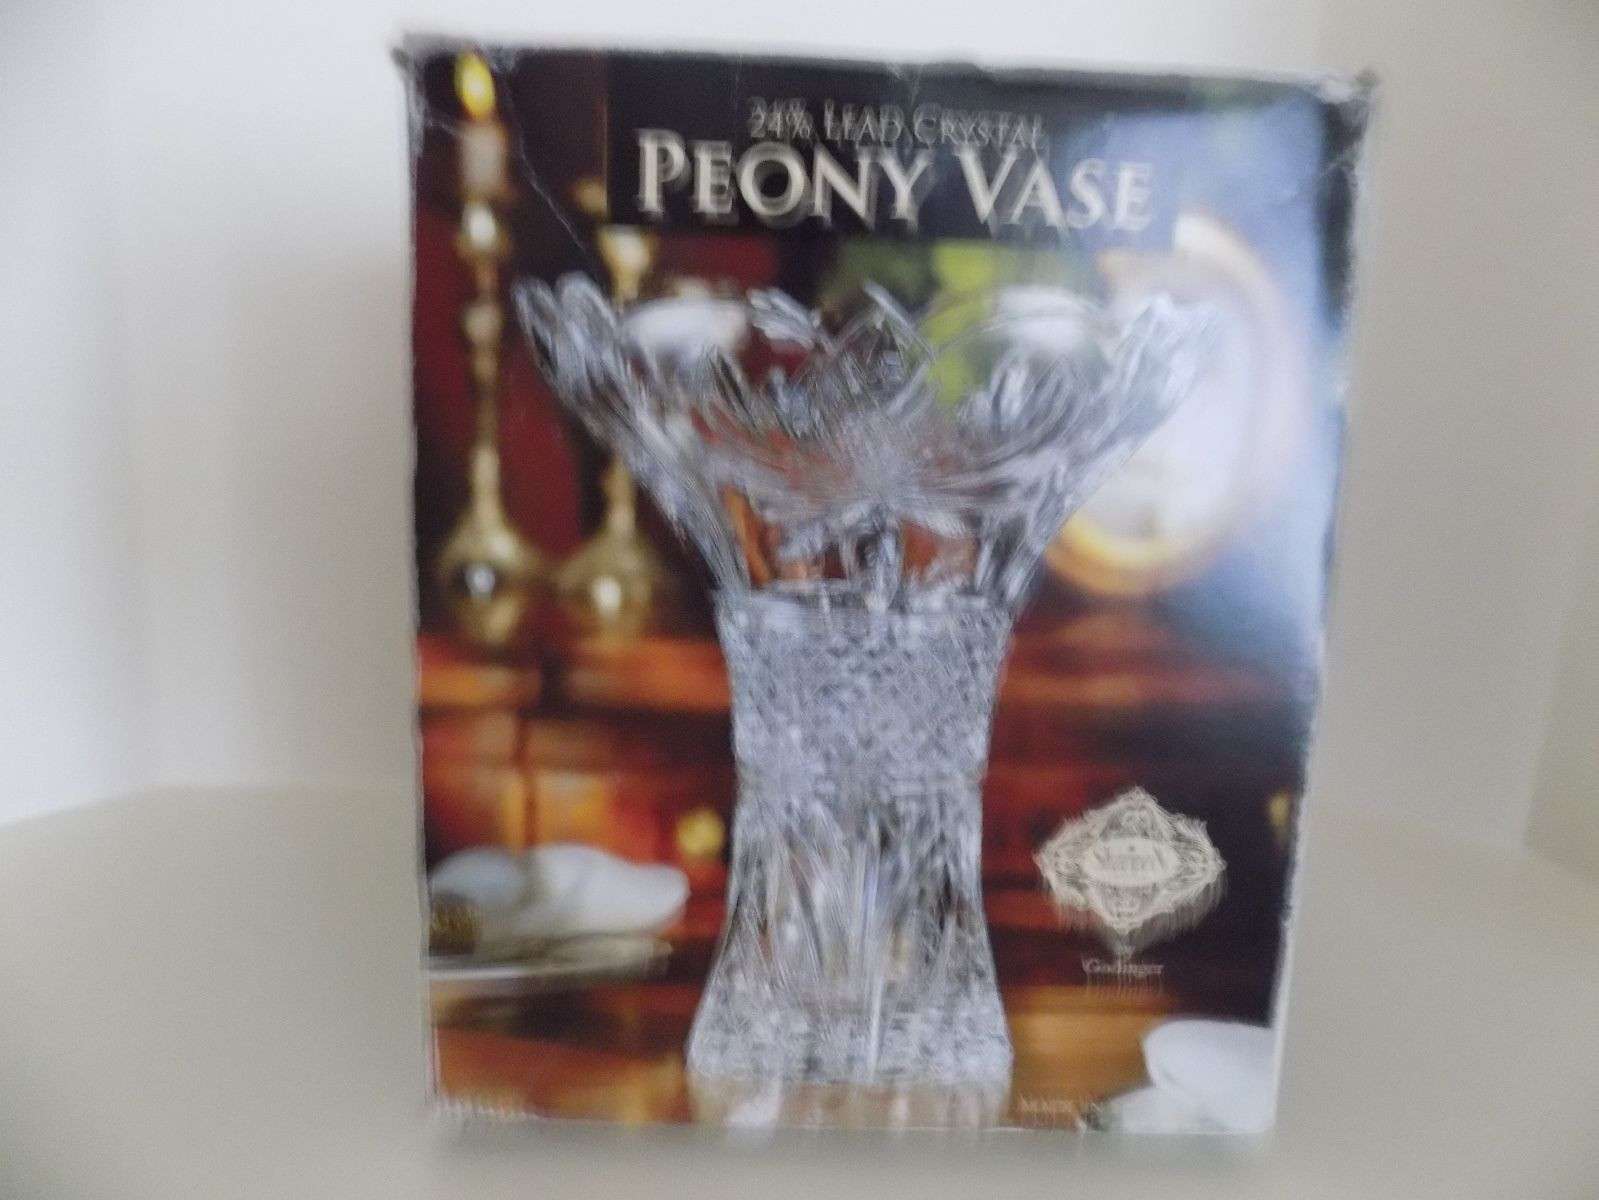 shannon crystal by godinger vase of shannon 24 lead crystal peony vase by godinger 39 00 picclick with regard to shannon 24 lead crystal peony vase by godinger 1 of 6only 1 available